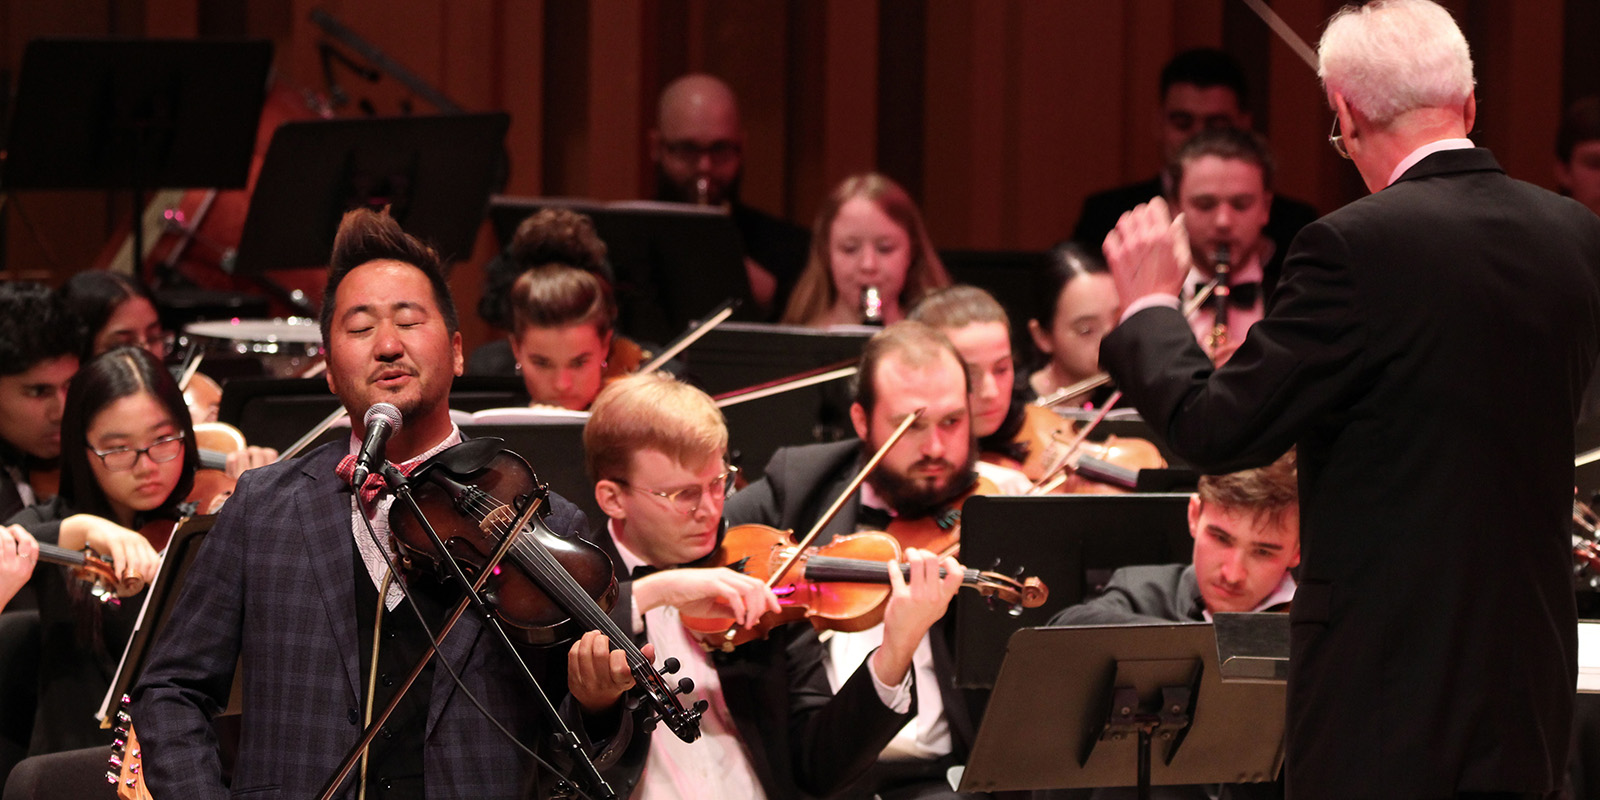 A man plays a violin in front of an orchestra.